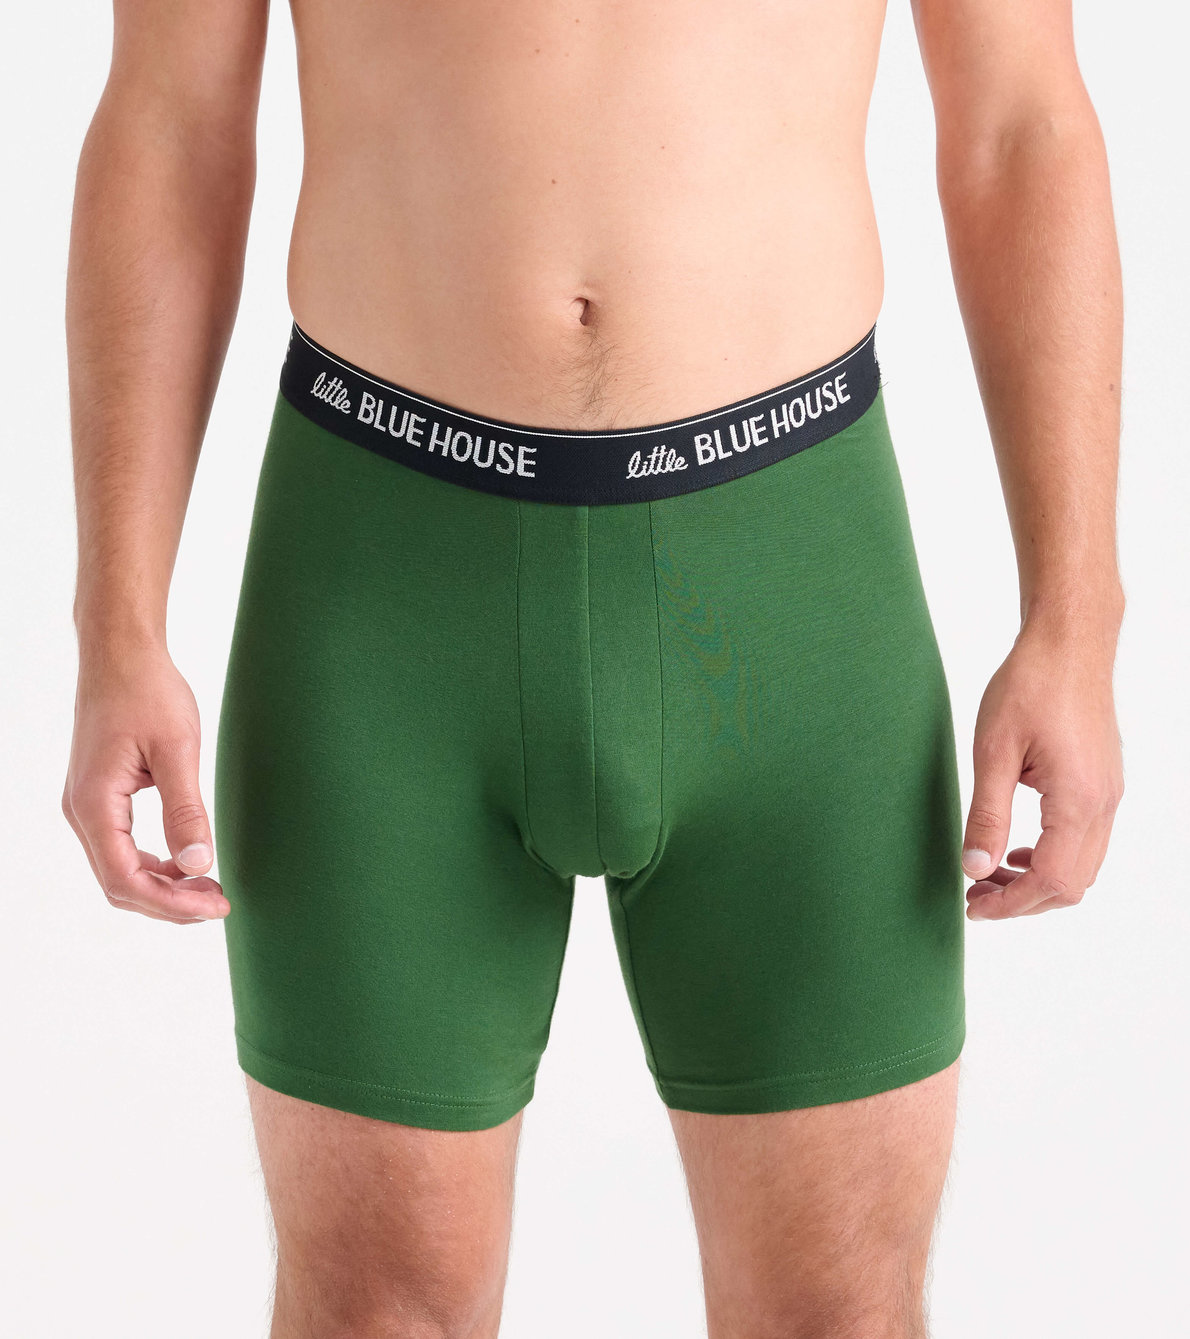 View larger image of Every Inch Counts Men's Boxer Briefs